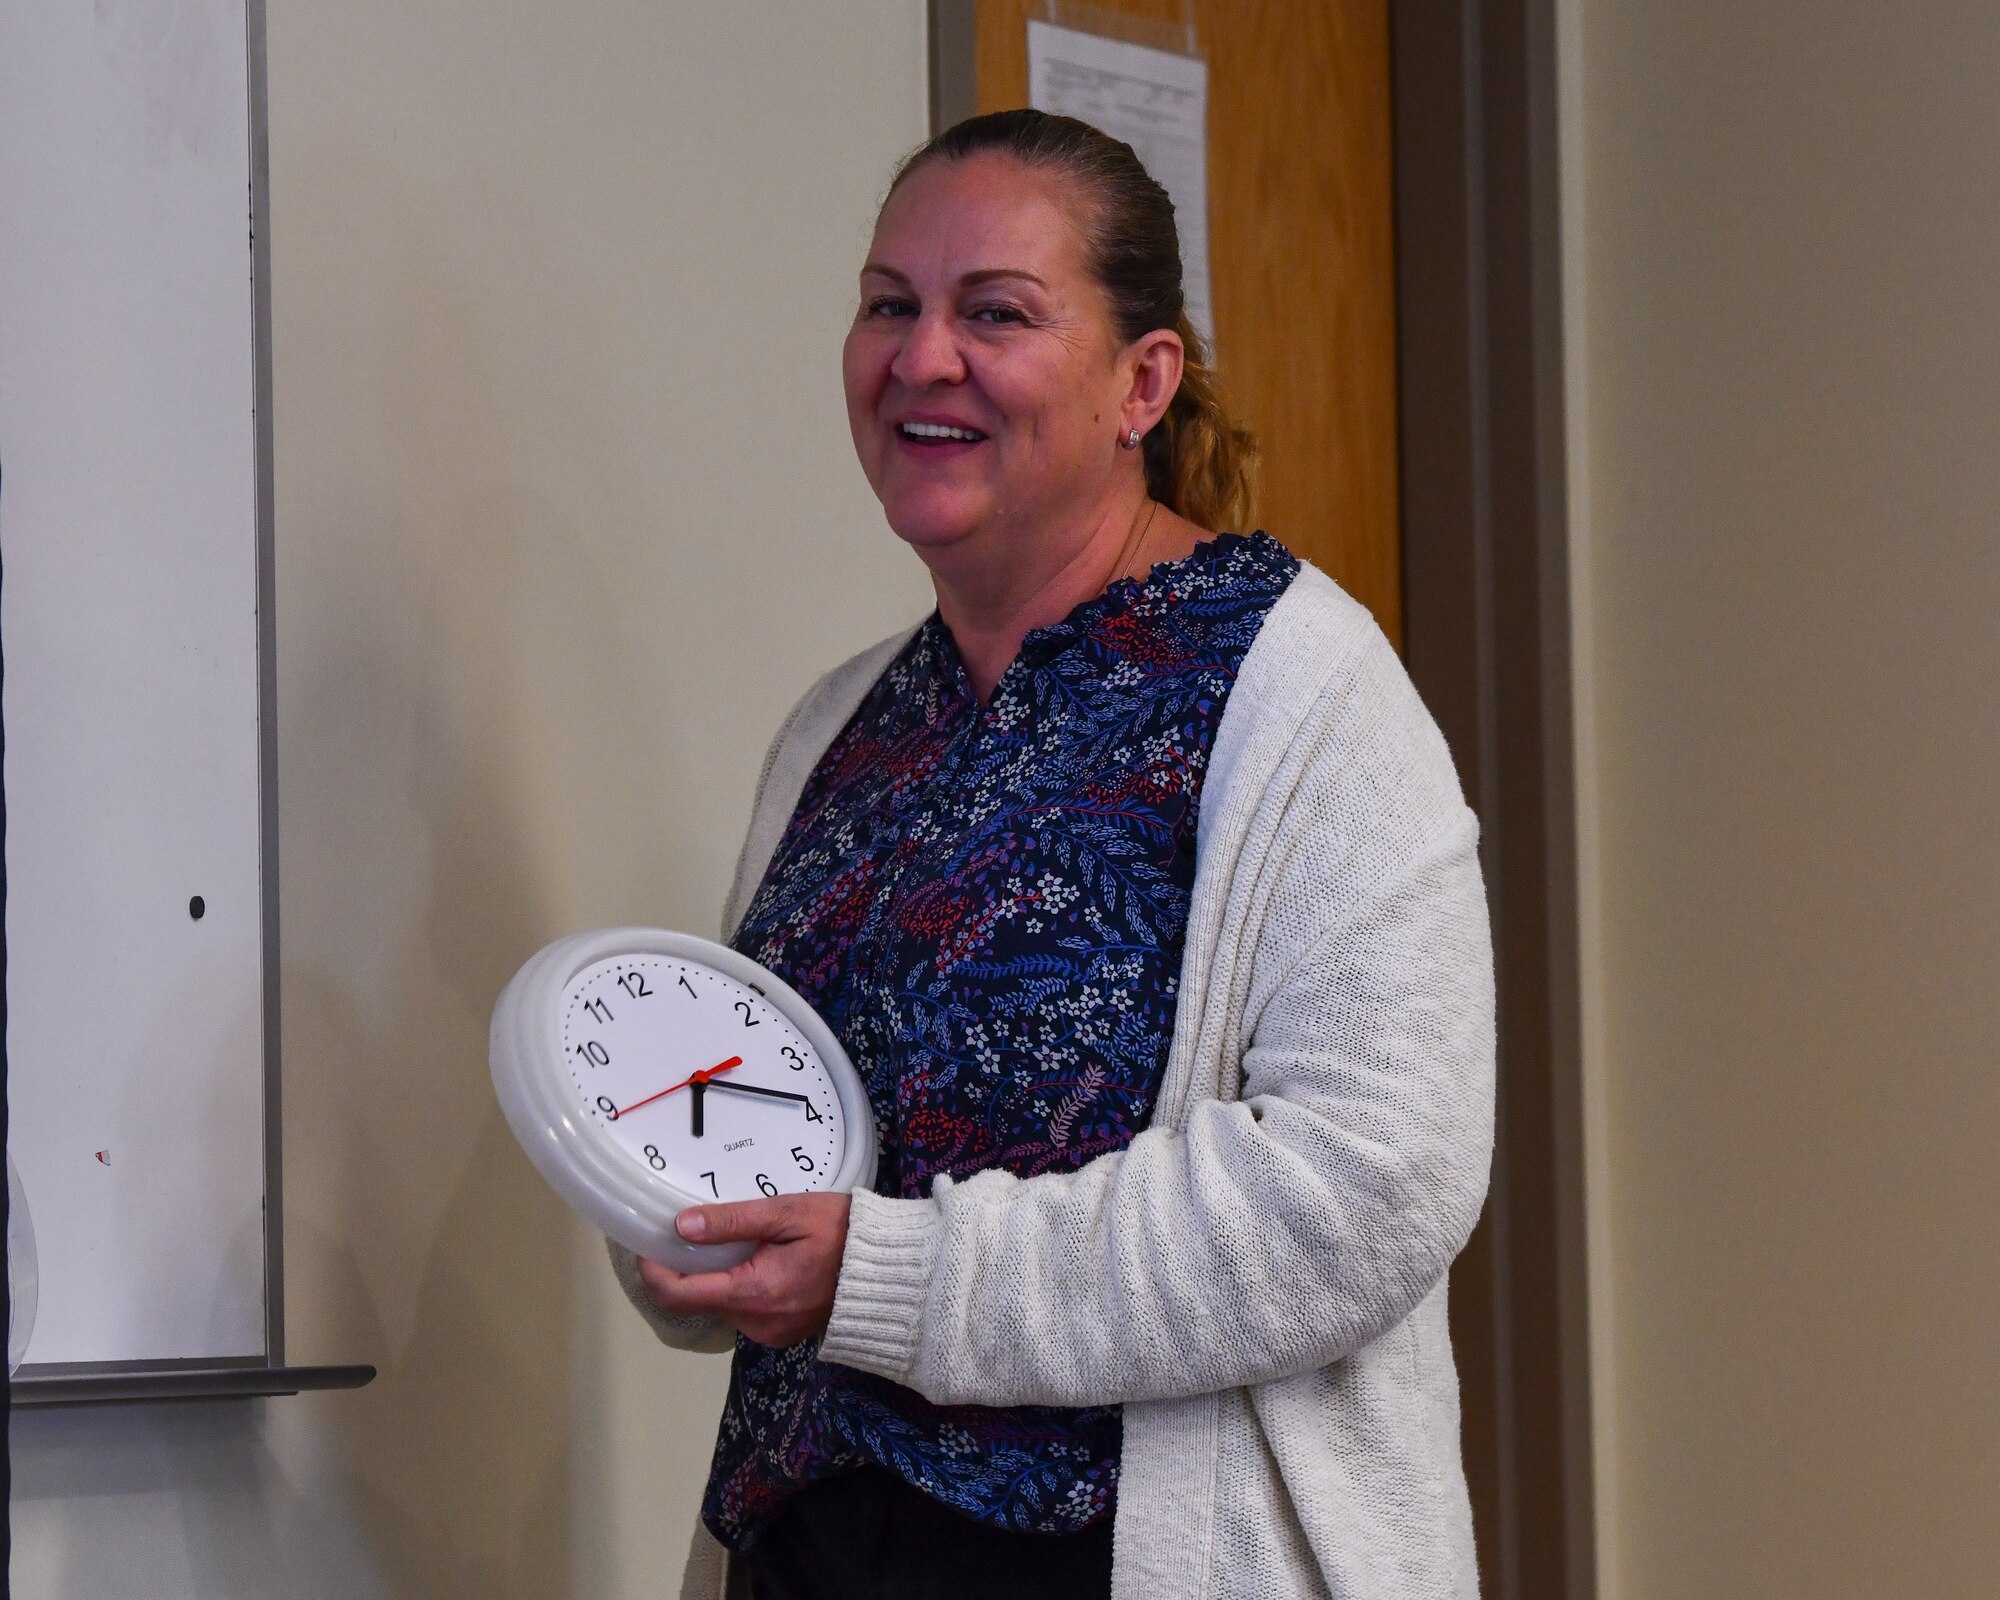 Danni Manyweathers, an expeditionary operations analysis for the Readiness Division under the Air Force Civil Engineering Center’s Modernization Section, changes the time on a clock to simulate an advancement of a tabletop exercise at Alpena Combat Readiness Training Center, Mich., May 22, 2021. The purpose of the tabletop exercise was to familiarize civil engineering Airmen with Rapid Airfield Deployment Recovery program and introduce them to scenarios from a leadership perspective during Exercise Mobility Guardian 2021. Mobility Guardian provides a realistic training environment for more than 1,800 Mobility Airmen to hone their skills in delivering rapid global mobility in current and future conflicts. (U.S. Air Force photo by Tech. Sgt. Kentavist P. Brackin)